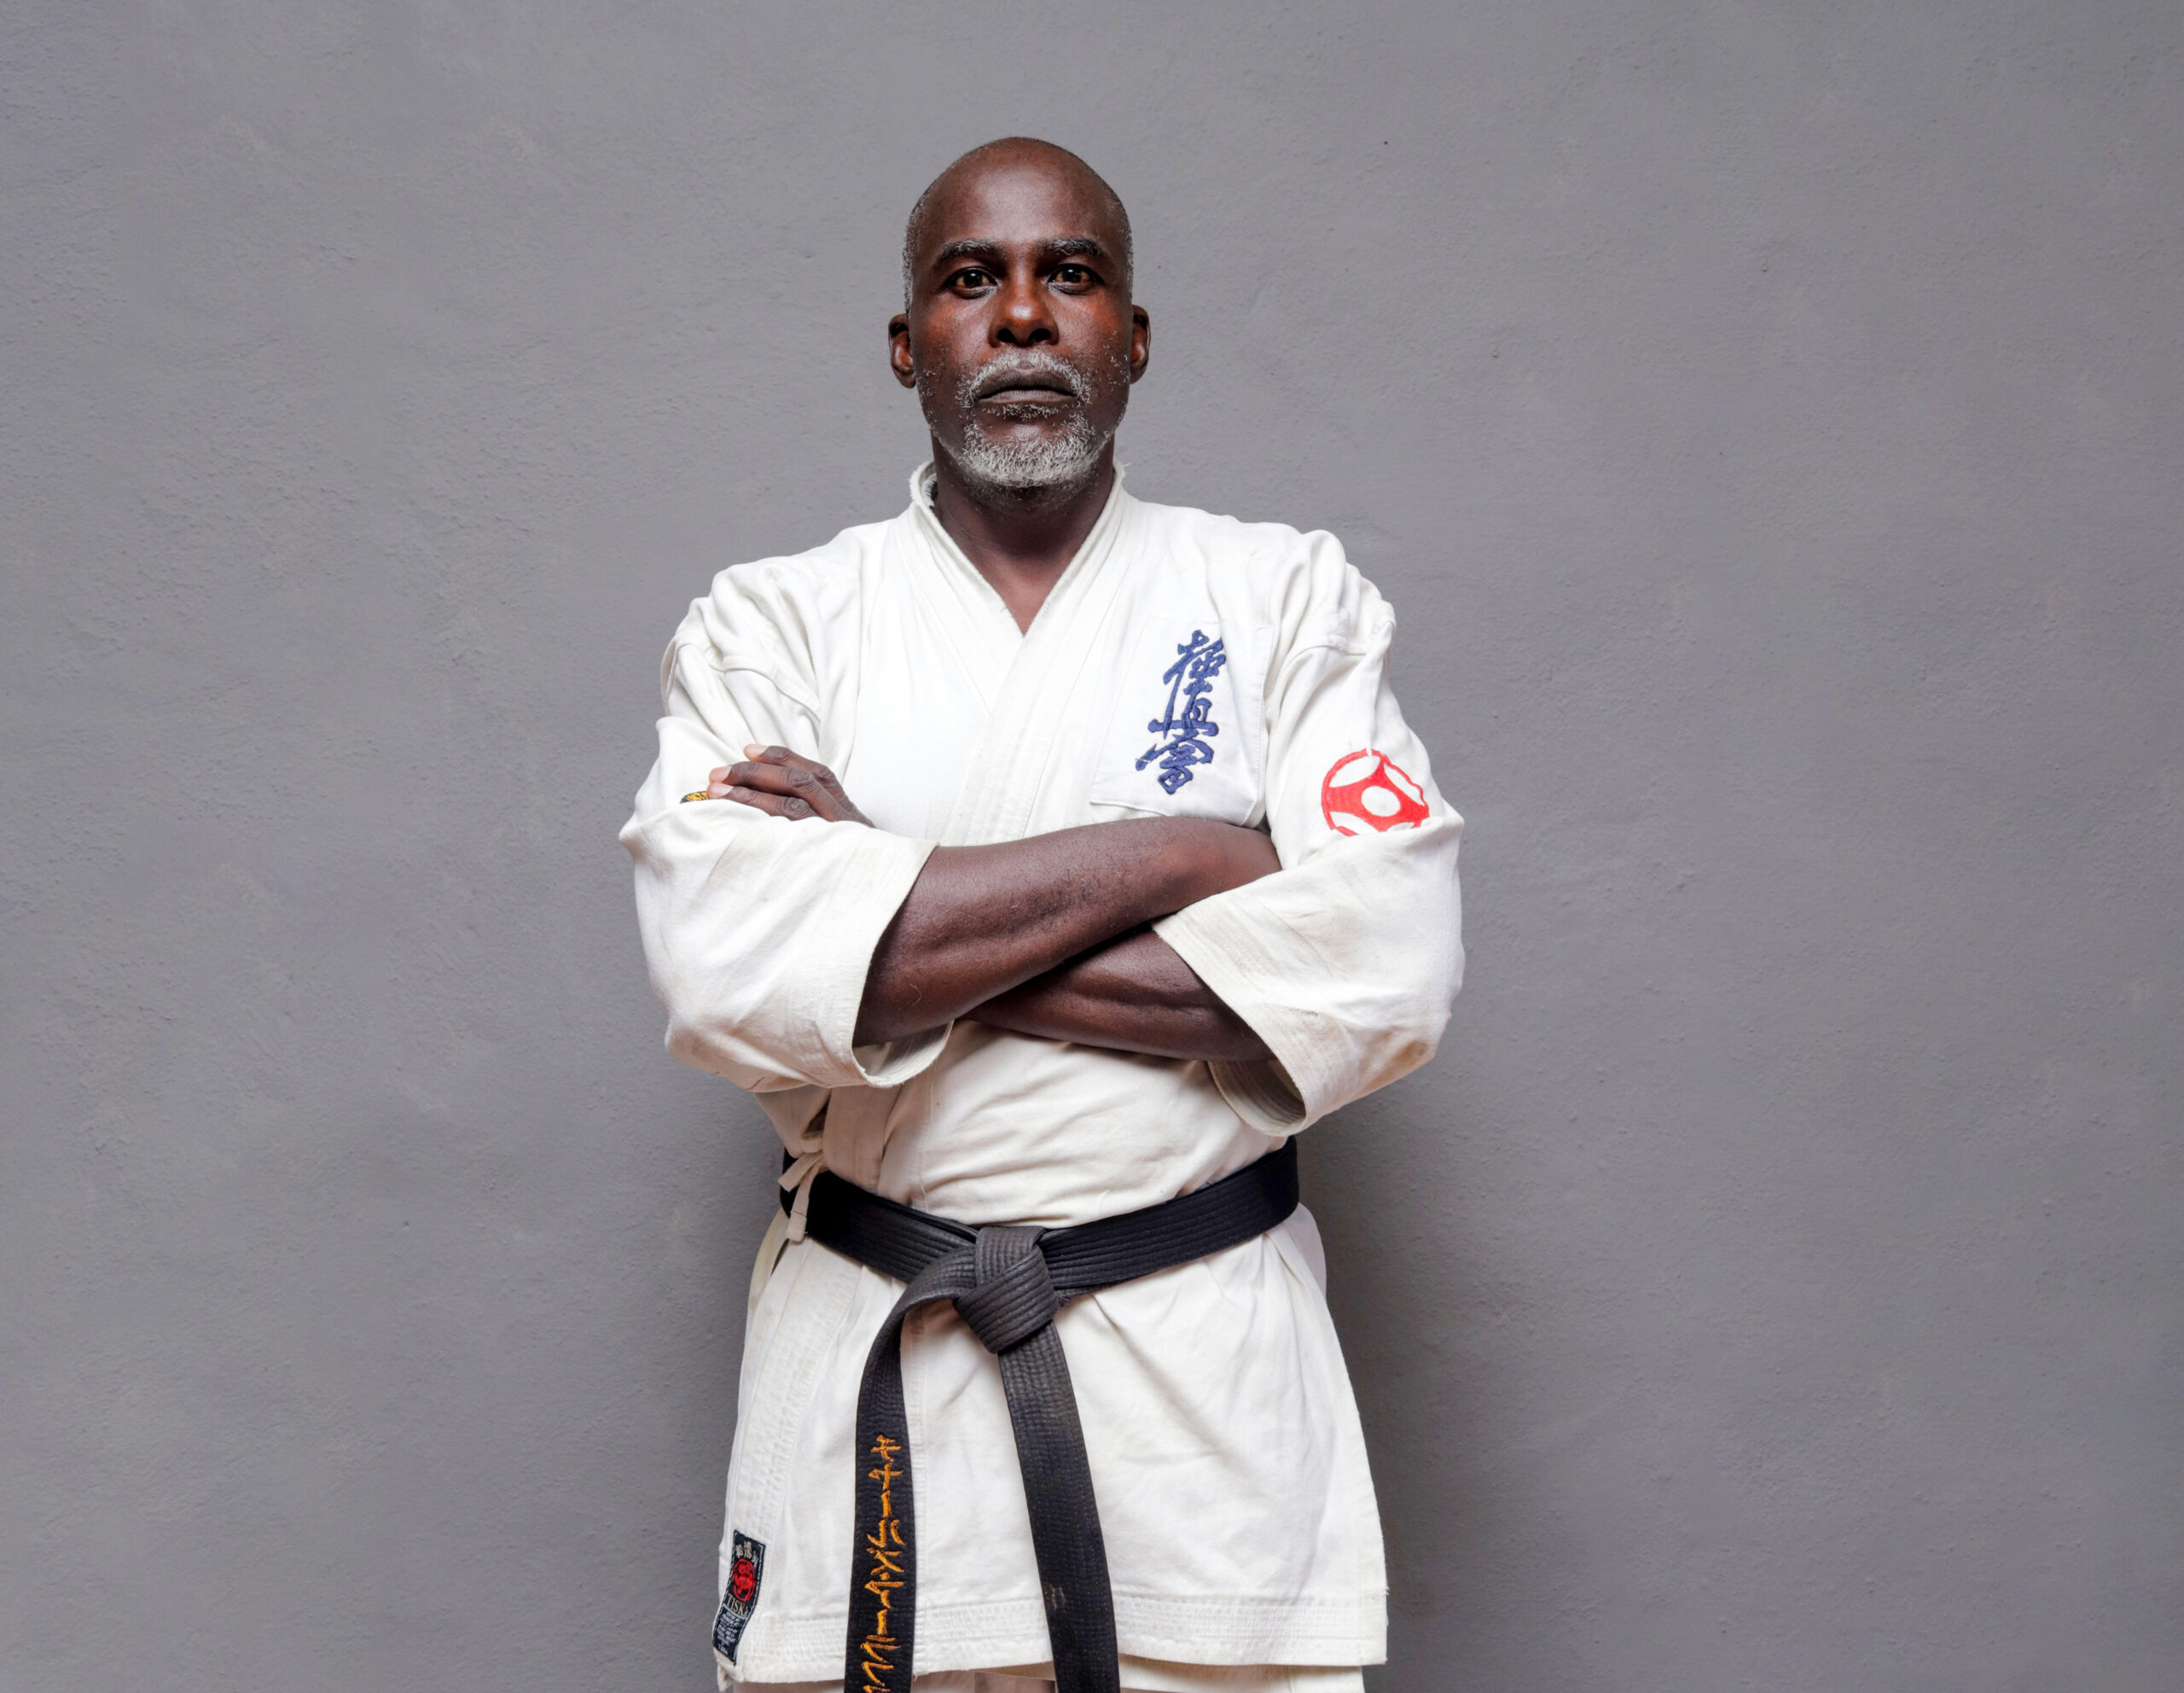 Master Charles Sambare 'Arufandika', owner of JKD Lee's JKD Mirror Karate Academy posing for a picture in his dojo at the Courtauld Theatre in Mutare, Zimbabwe. Photo: Jacqueline Muchazoreka, bird story agency